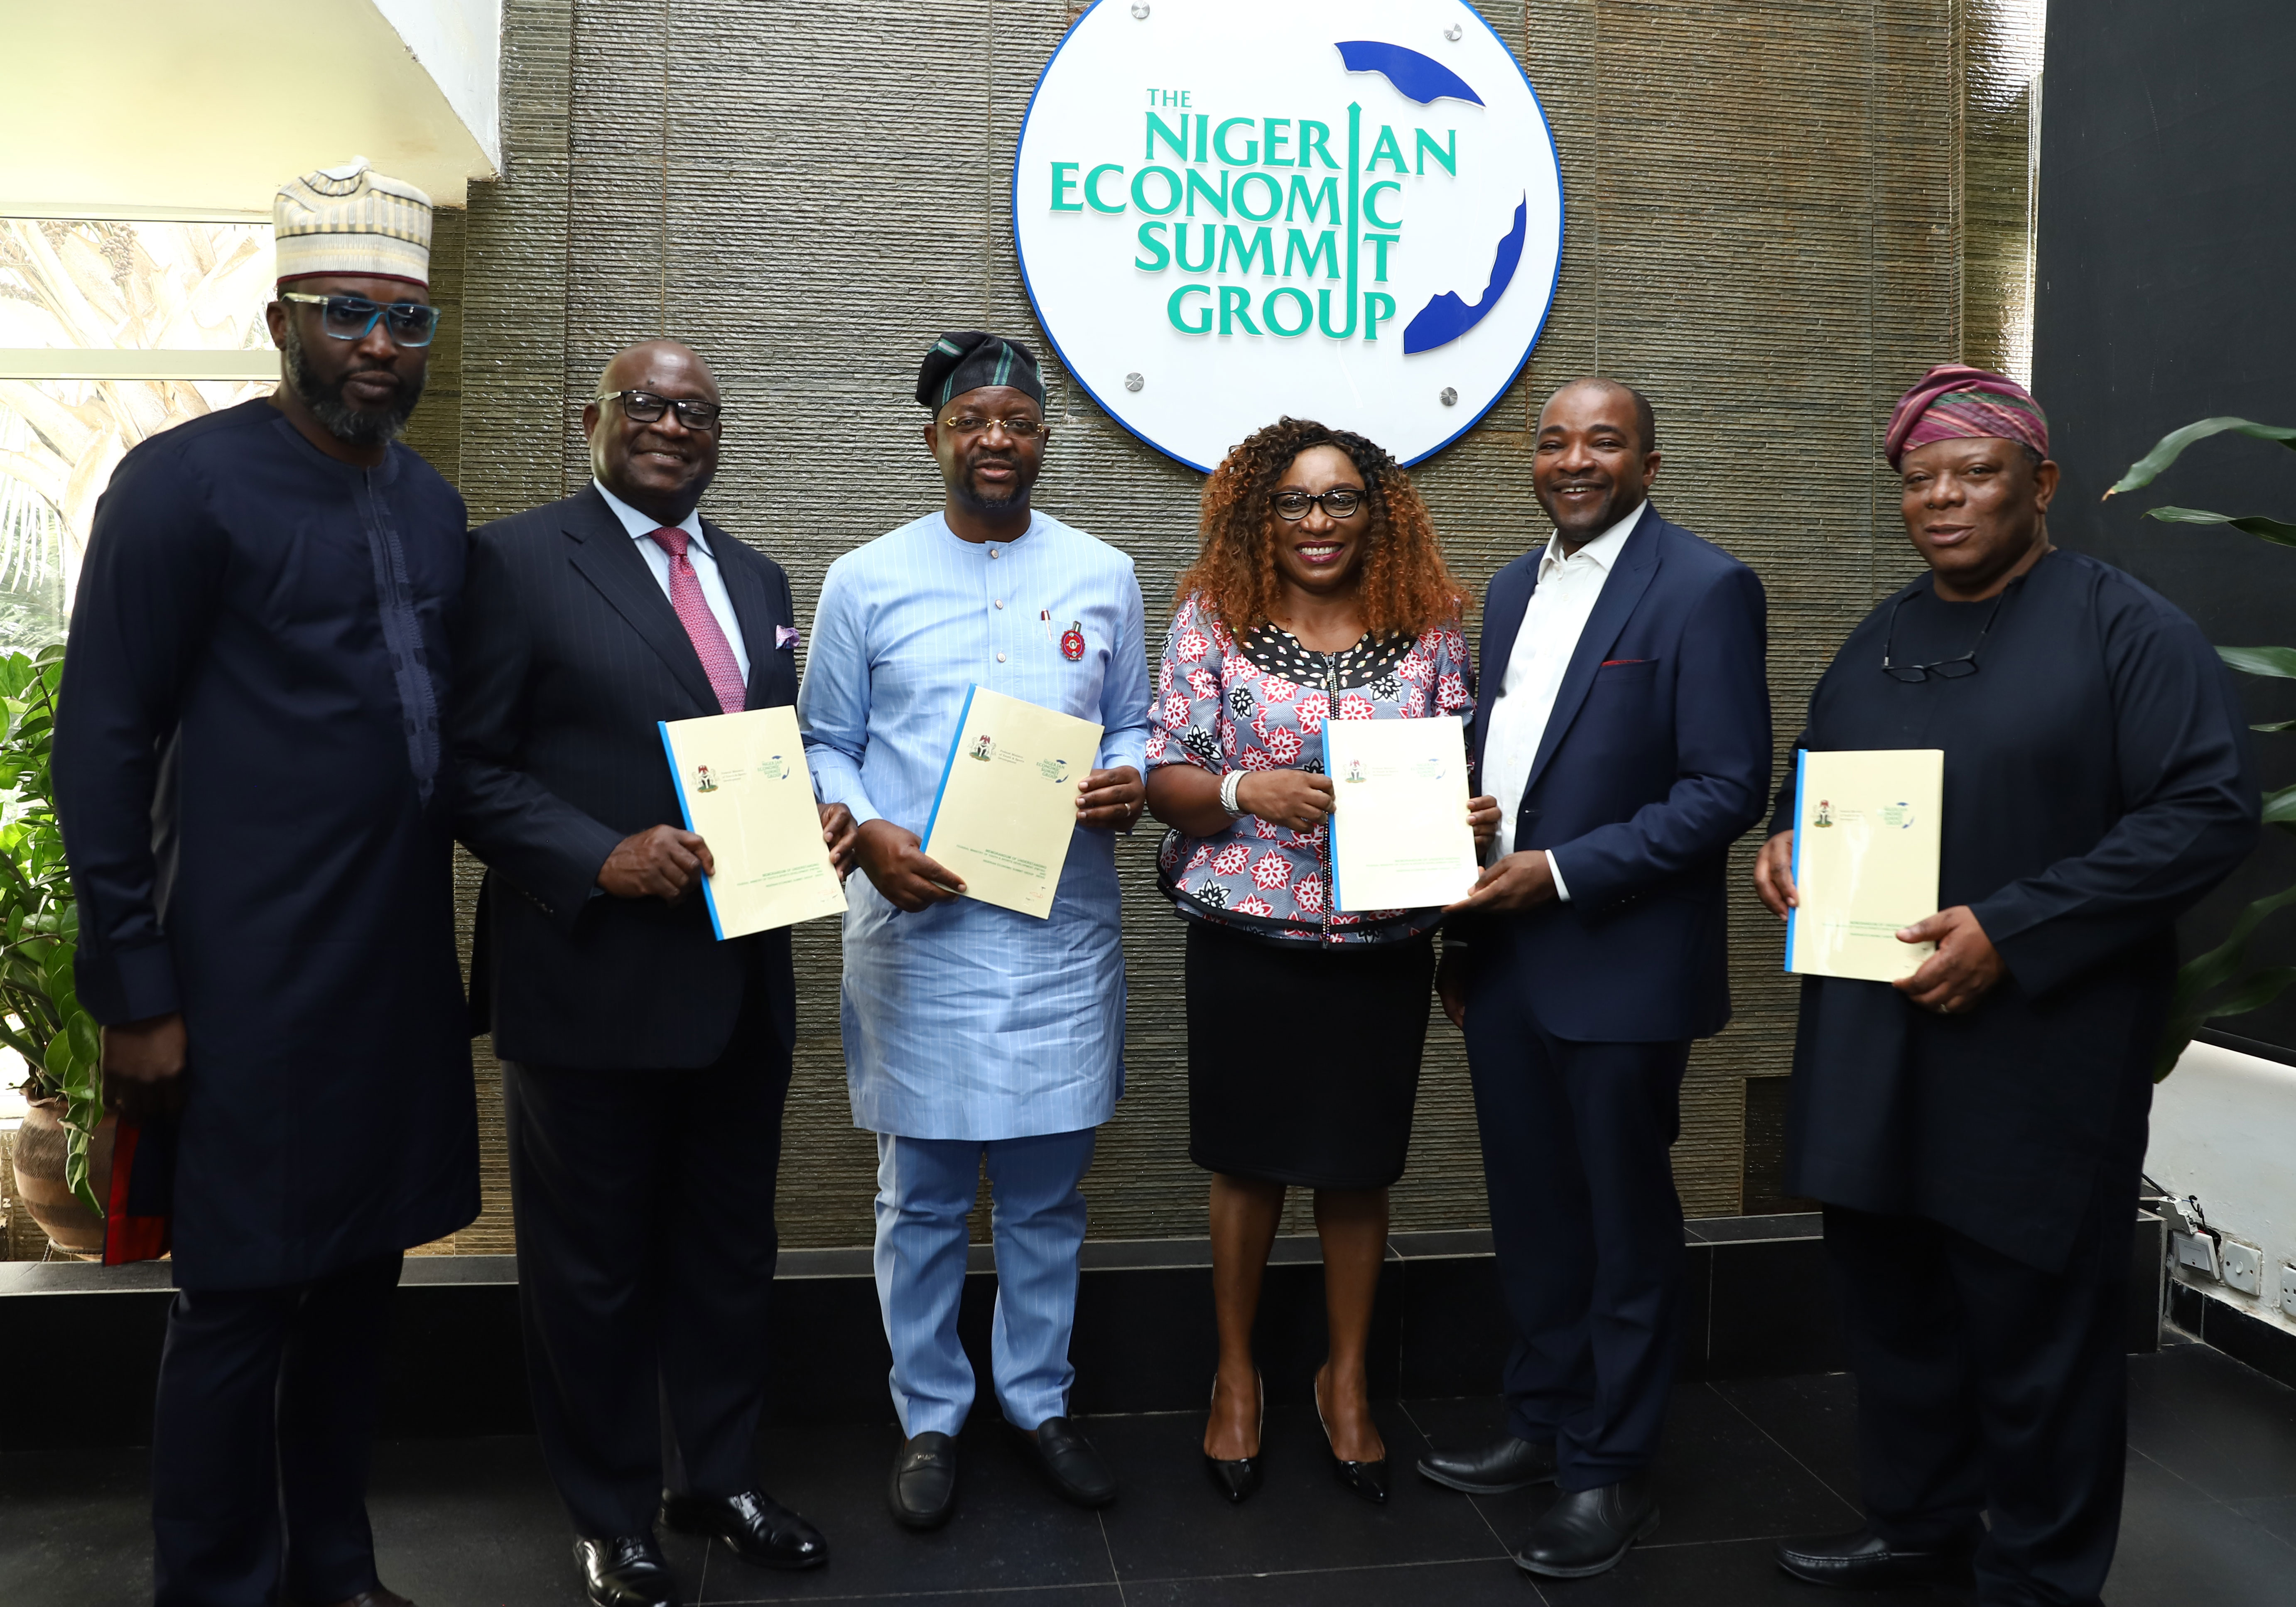 NESG and Federal Ministry of Youth and Sports Development Sign MoU on Sports industry development, The Nigerian Economic Summit Group, The NESG, think-tank, think, tank, nigeria, policy, nesg, africa, number one think in africa, best think in nigeria, the best think tank in africa, top 10 think tanks in nigeria, think tank nigeria, economy, business, PPD, public, private, dialogue, Nigeria, Nigeria PPD, NIGERIA, PPD